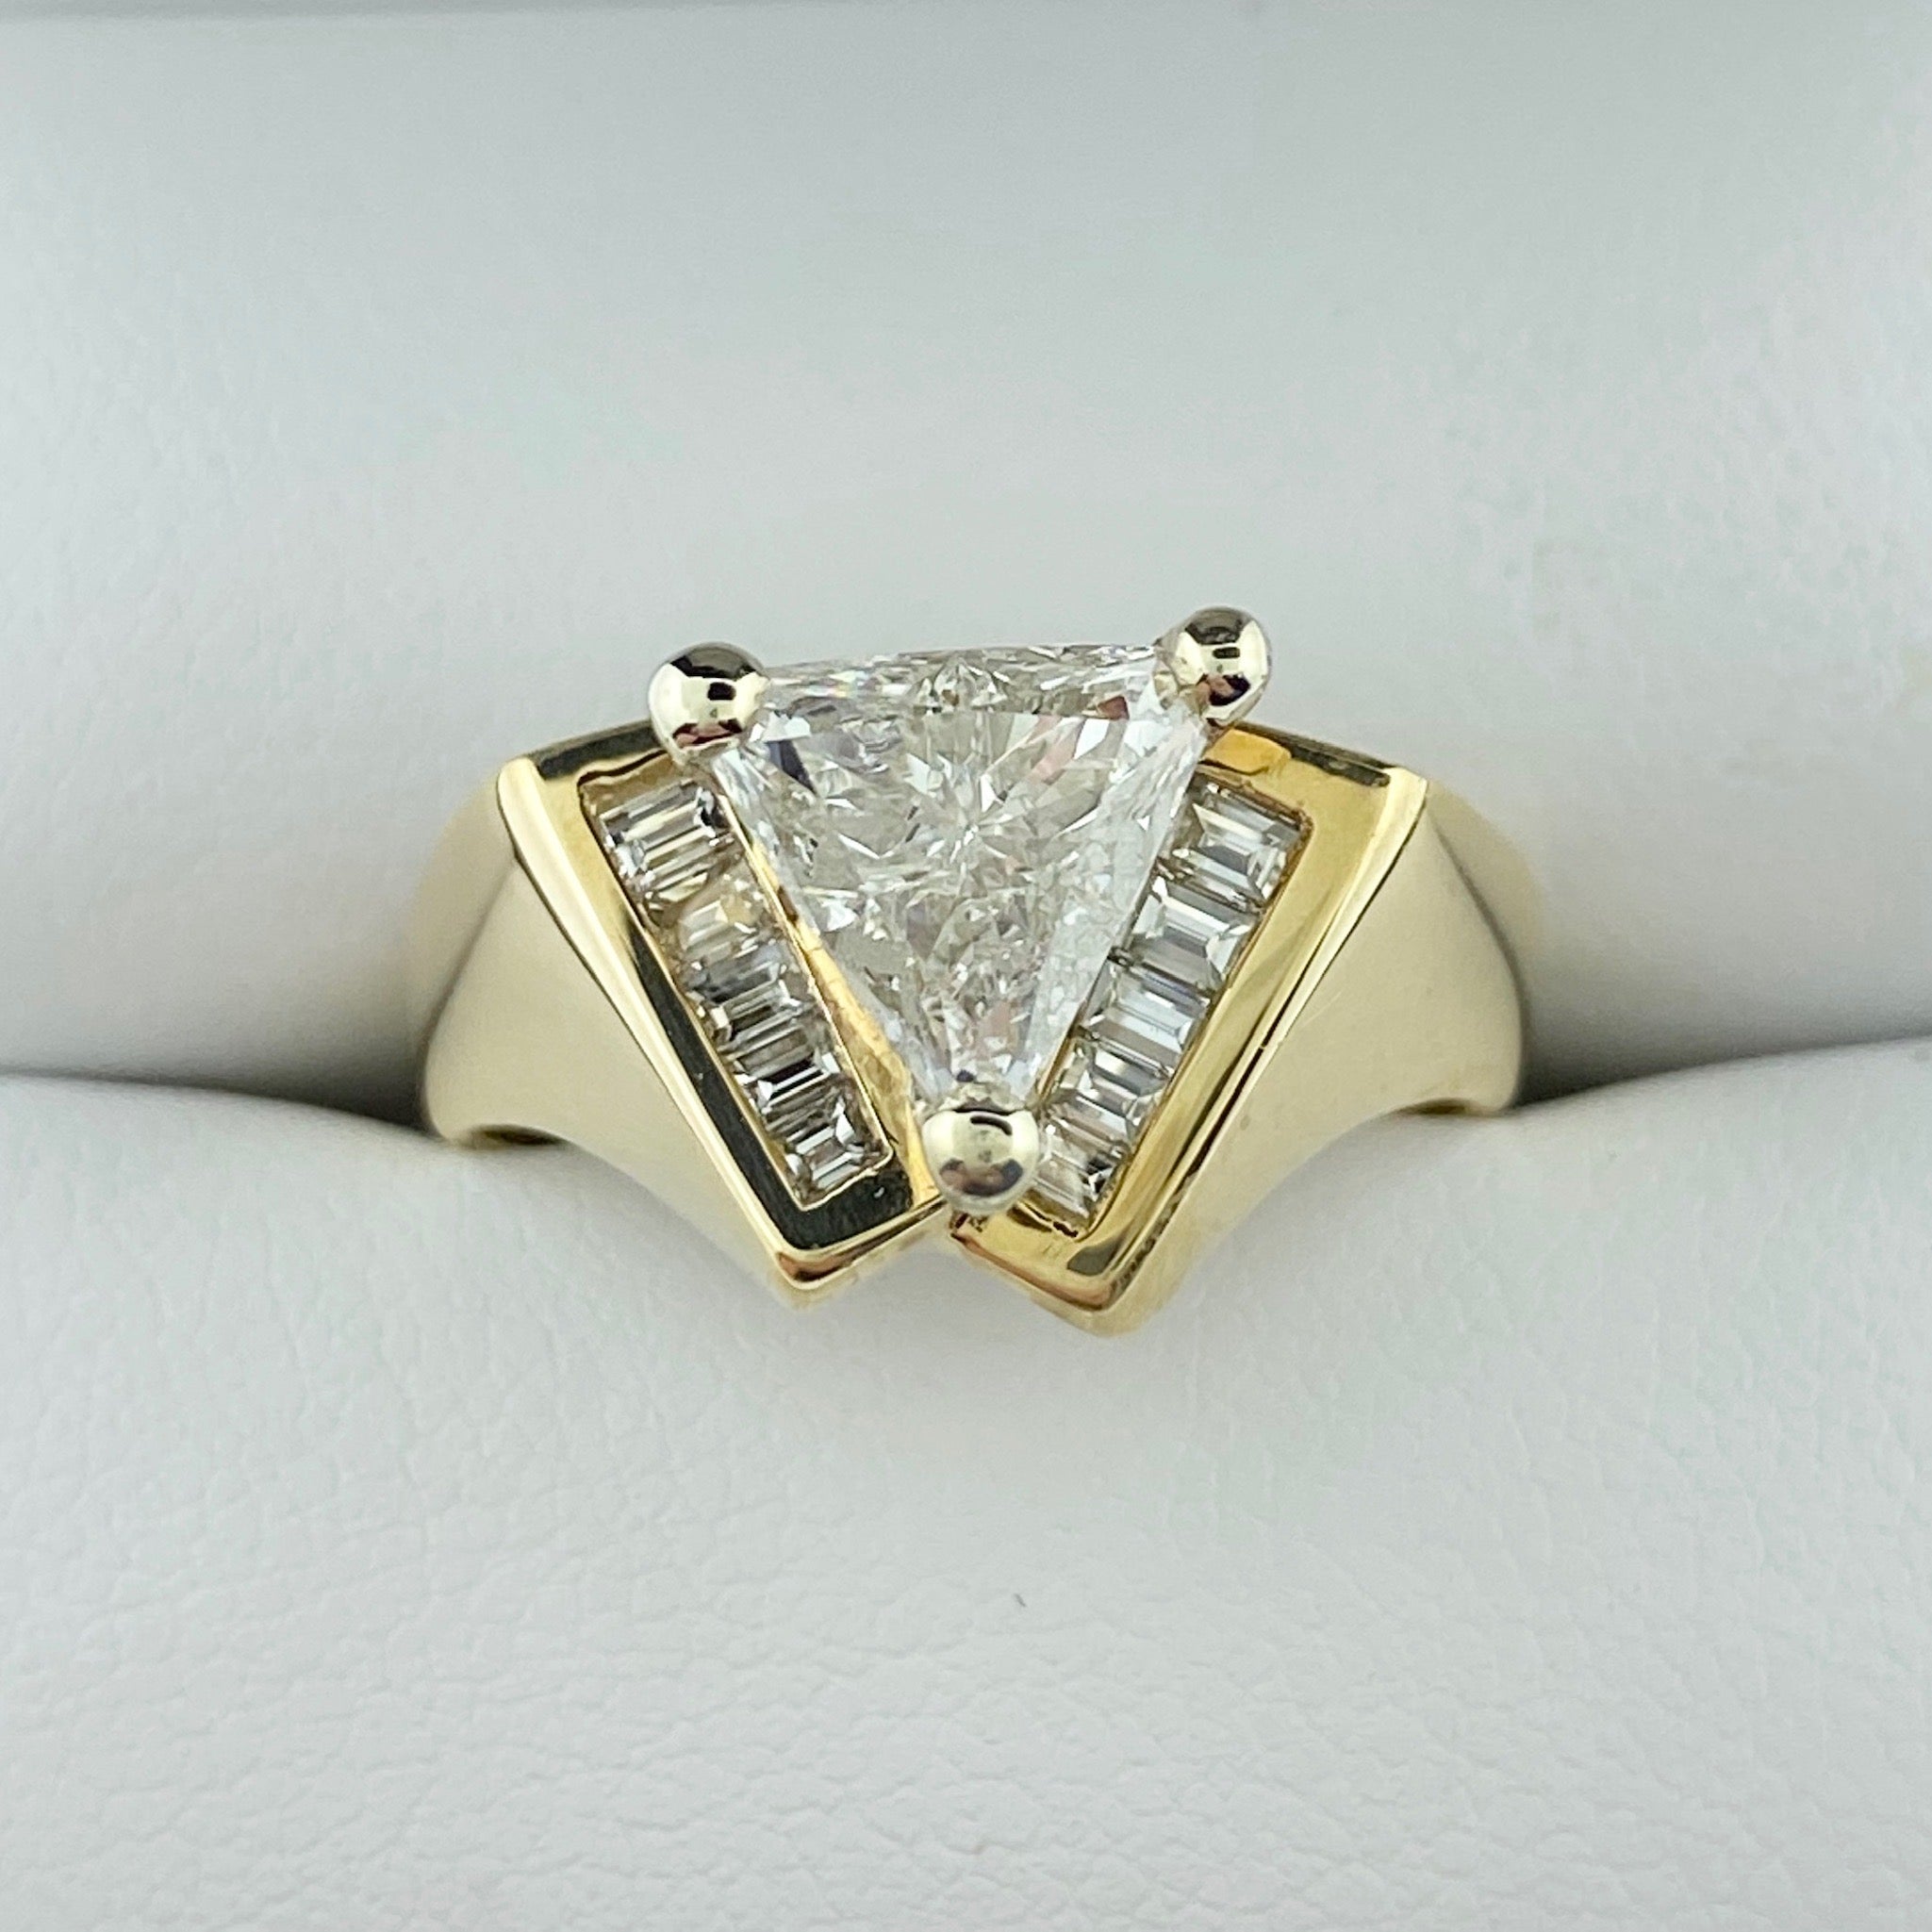 Male Mens American Diamond Gold Ring, 15 Gm at Rs 500/gram in Surat | ID:  22600586088